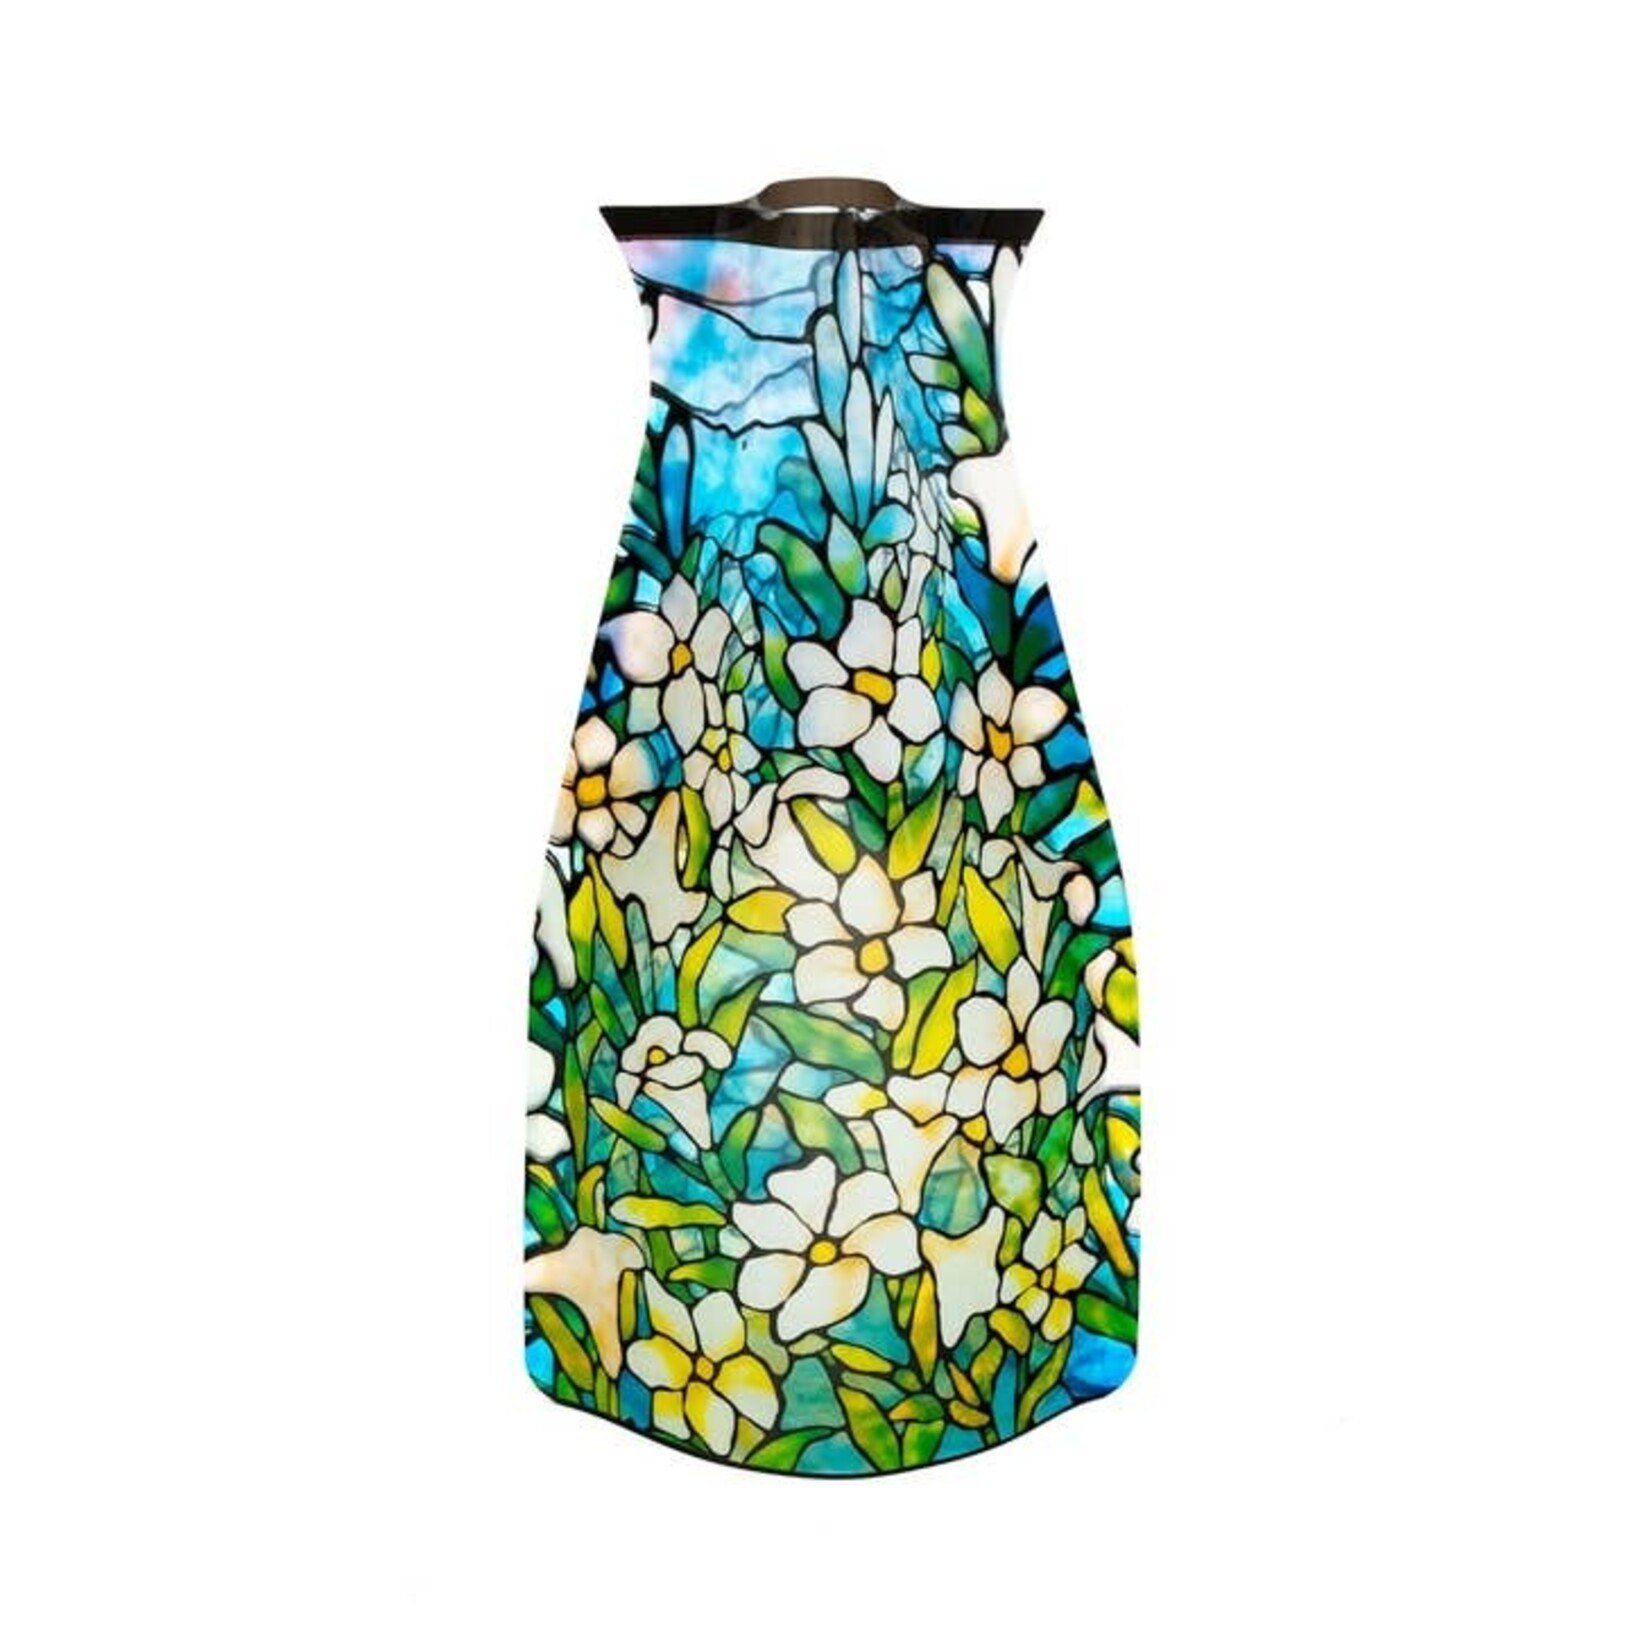 Modgy Louis C. Tiffany Field of Lilies Modgy Vase